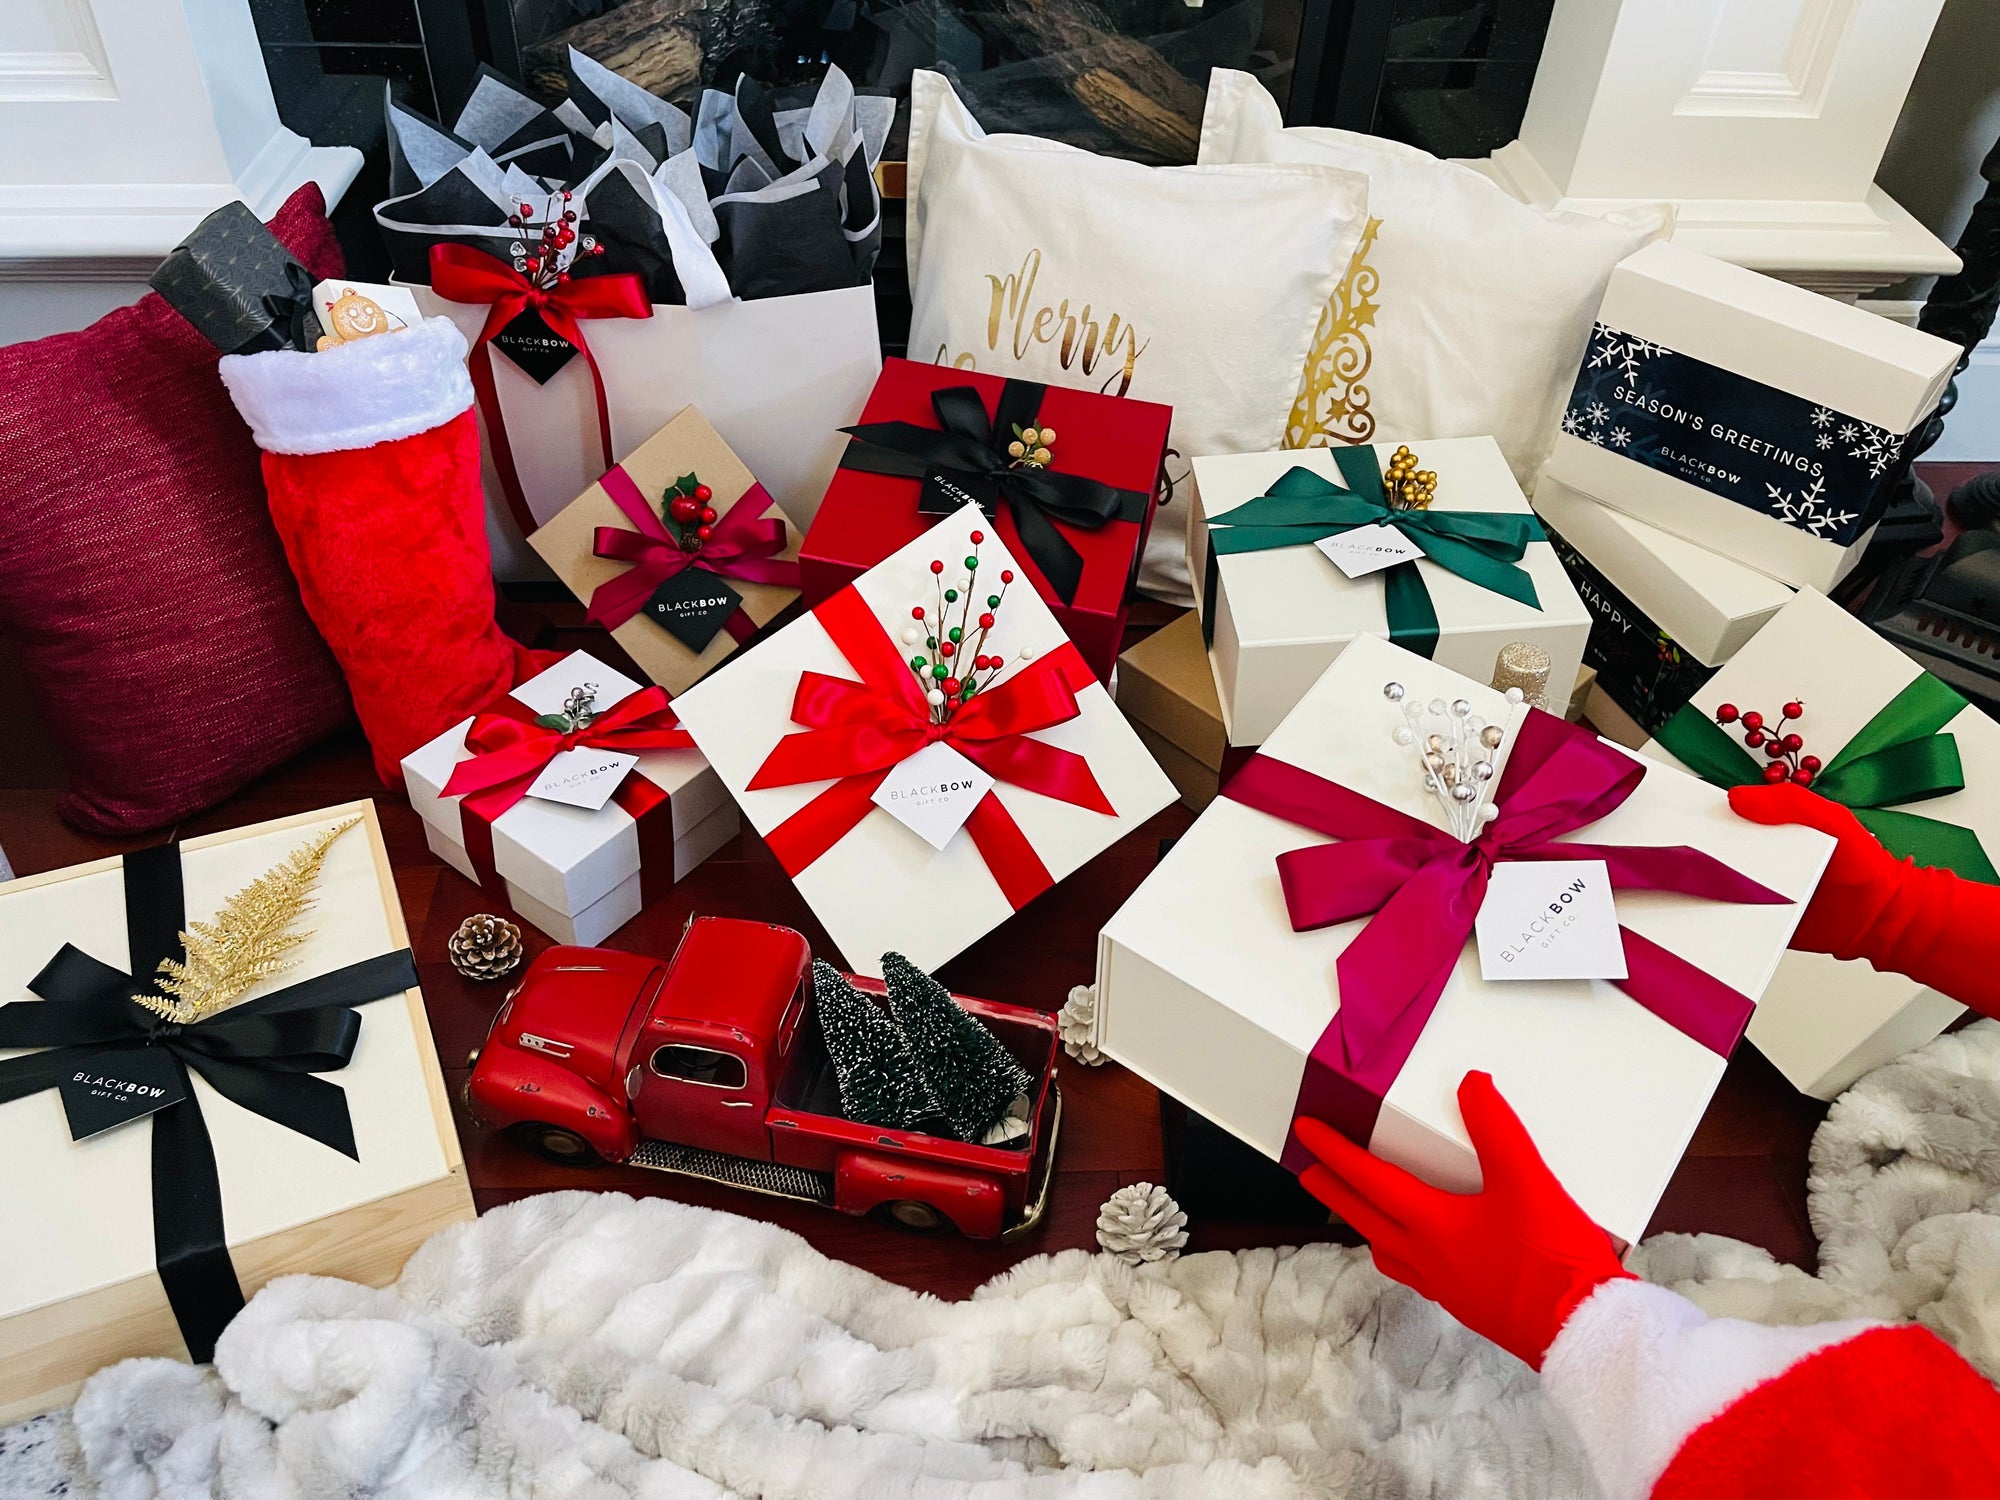 Festive Gifting Guide: Spreading Cheer in the Workplace